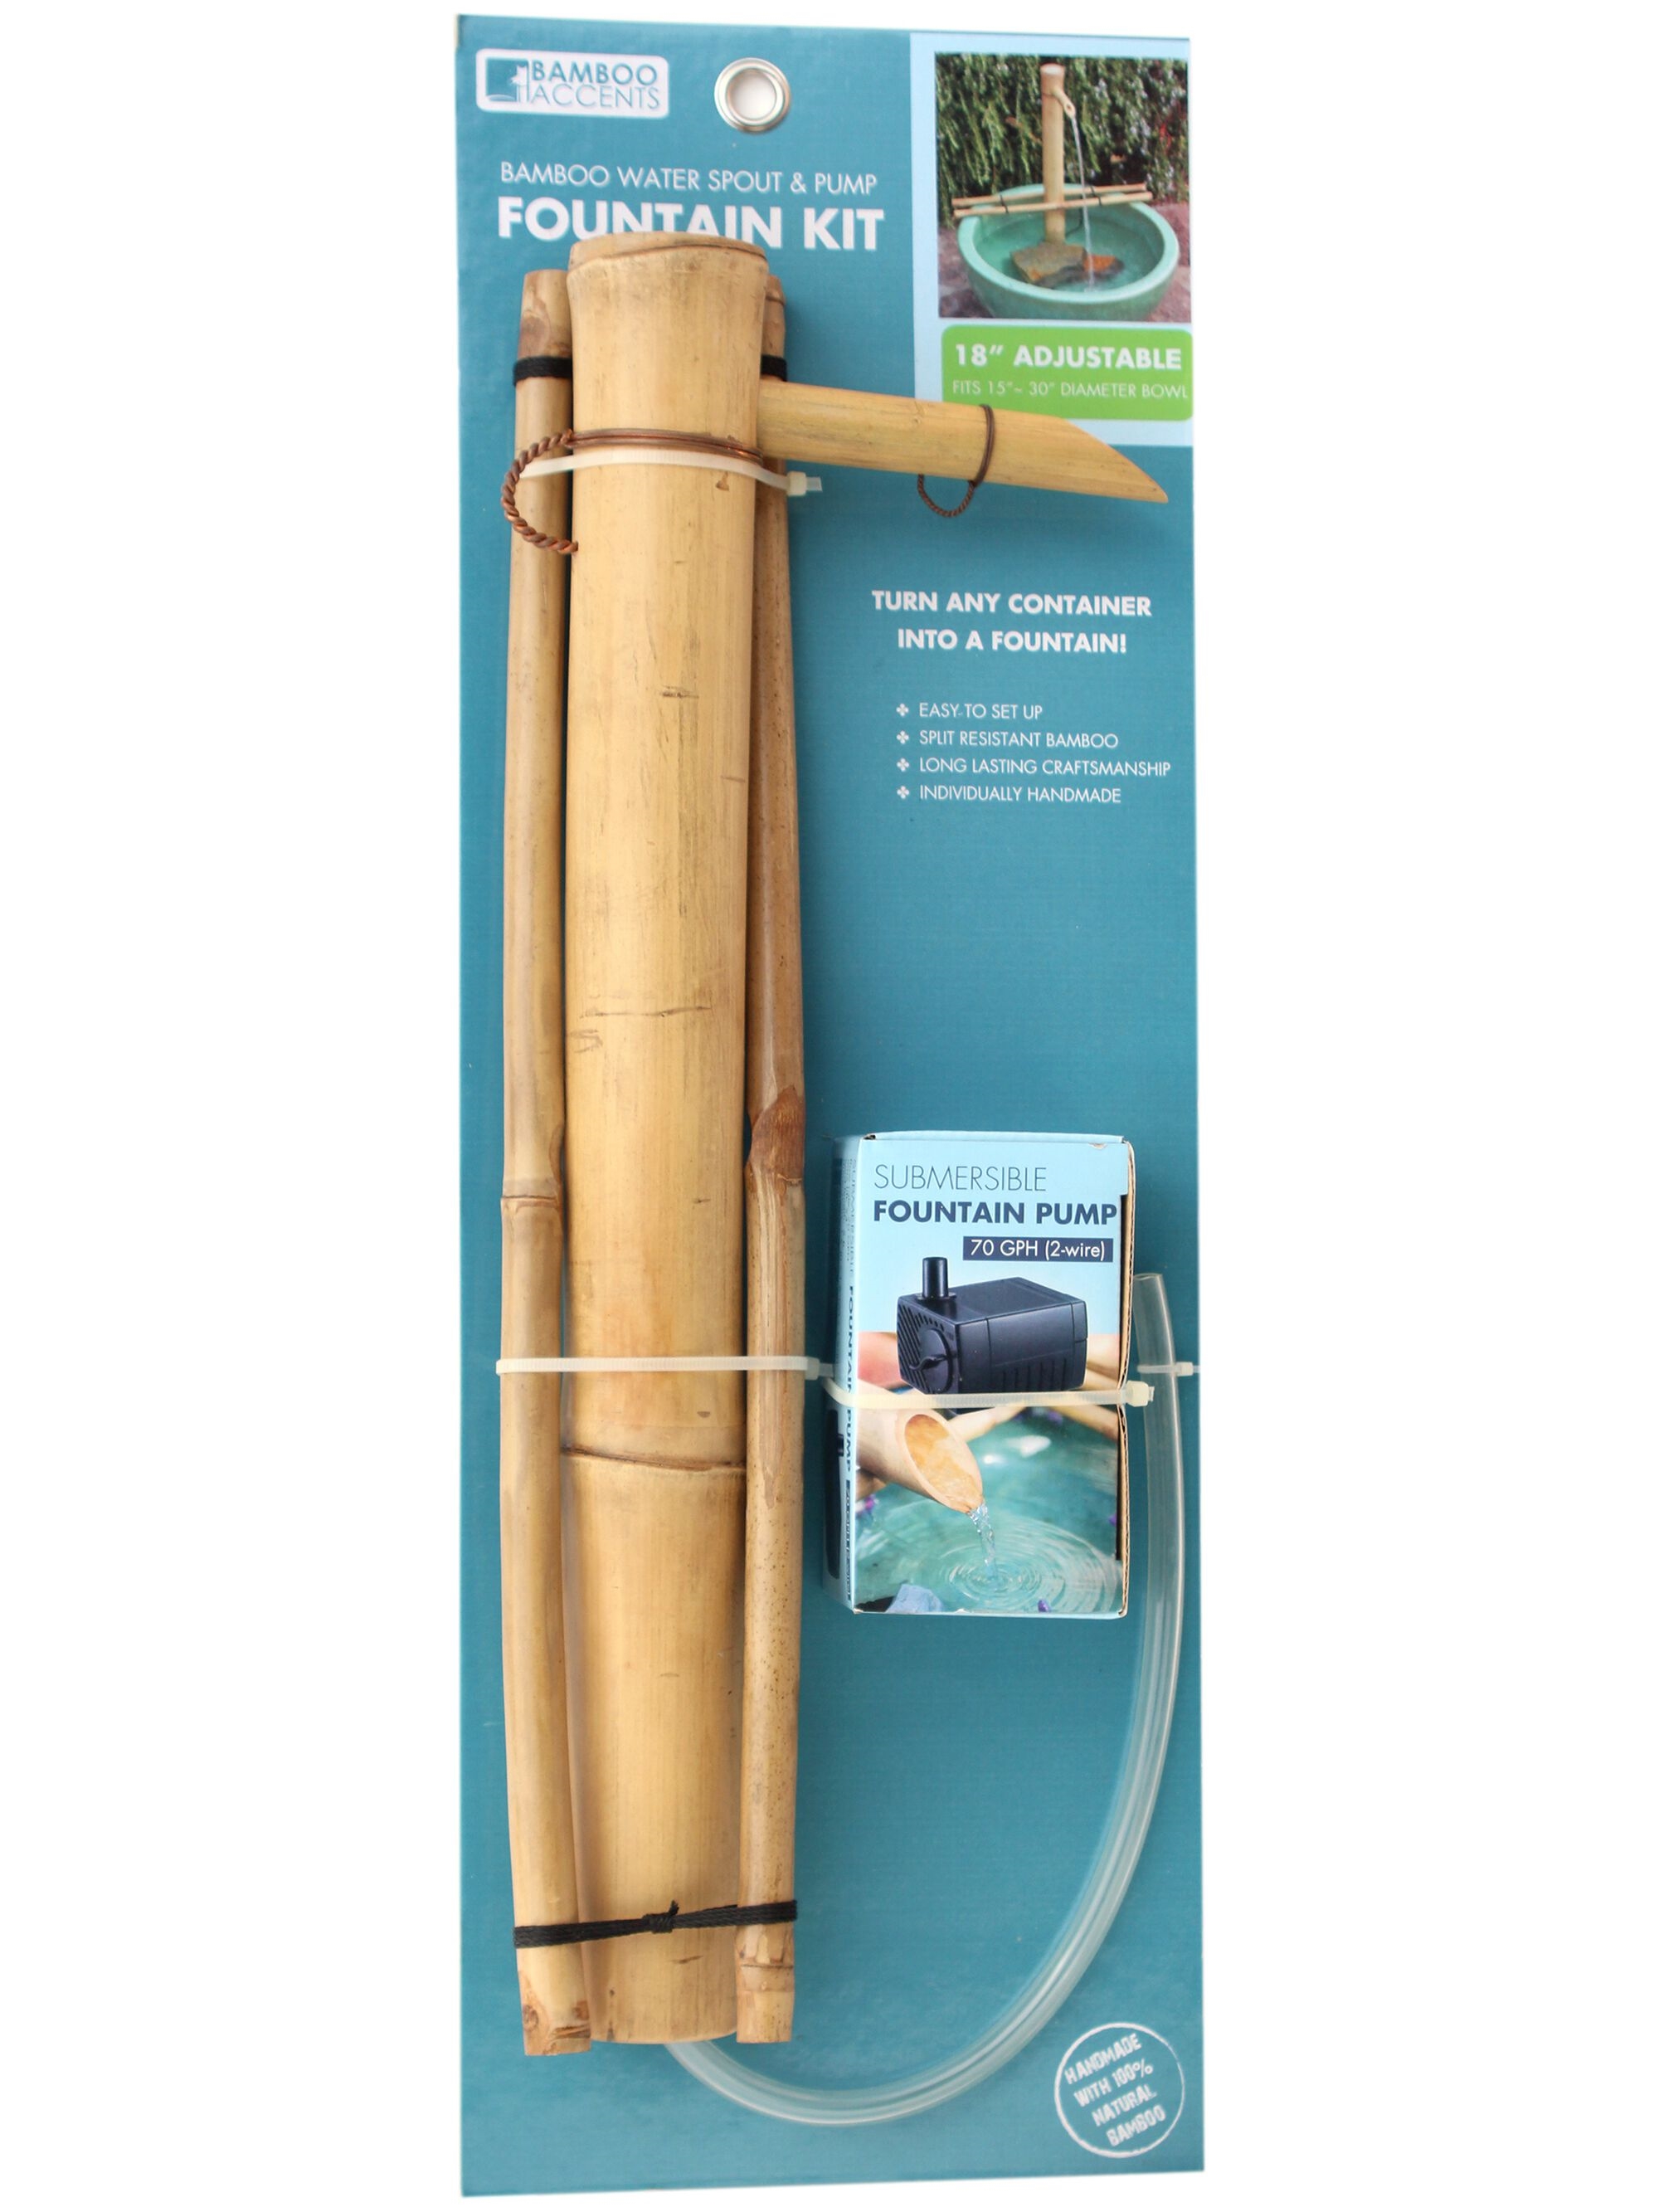 Bamboo Accents Water Fountain with Pump, Backyard Pond Kit, Large 18 Inch  Adjustable Style, Smooth Split Resistant Bamboo, Natural Bamboo Fountain -  Pricepulse